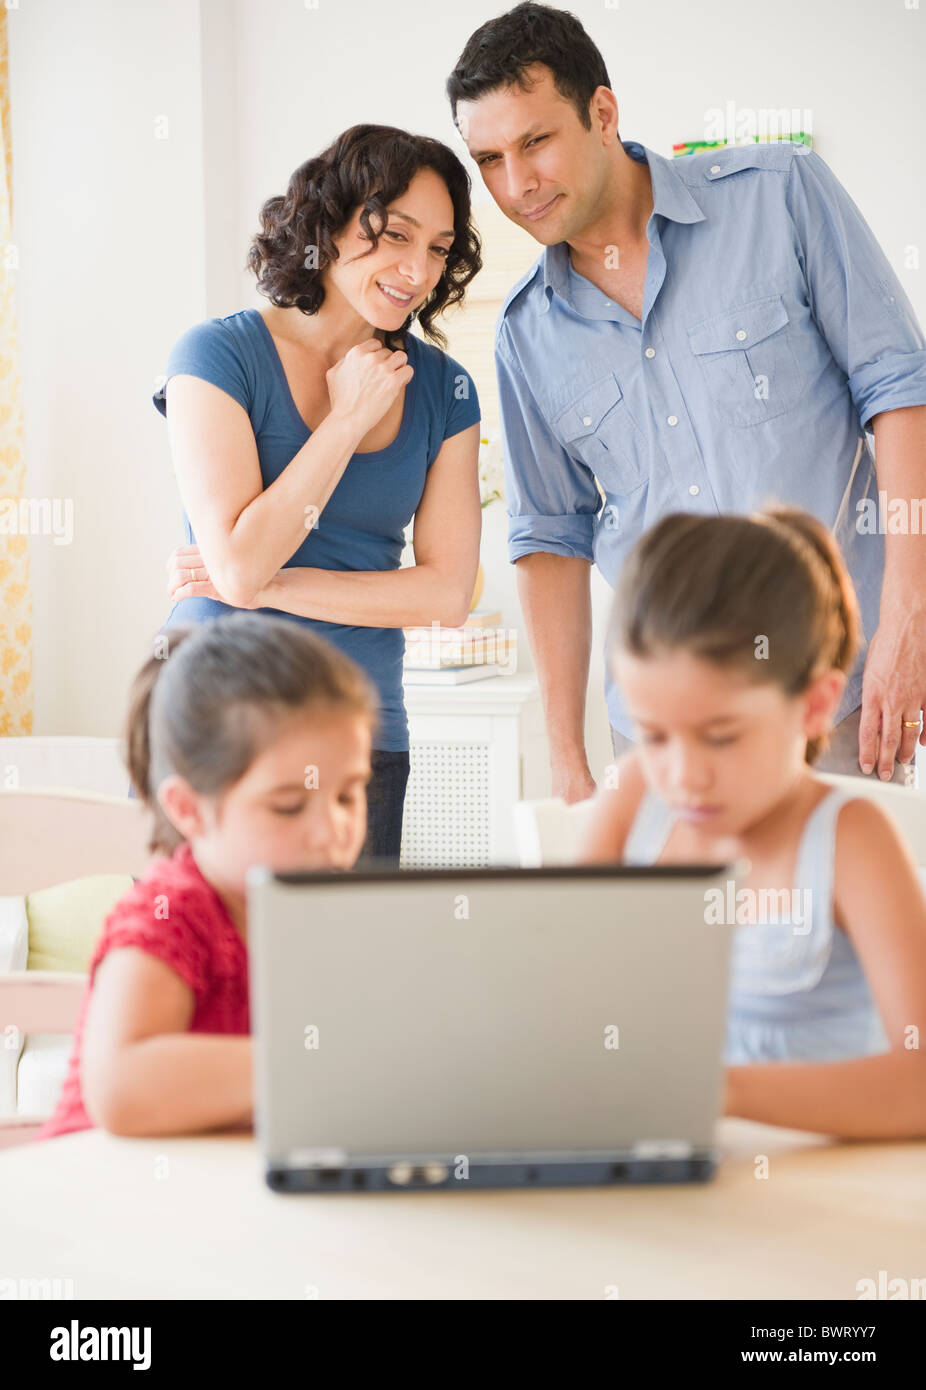 Father and mother watching children using internet together Stock Photo